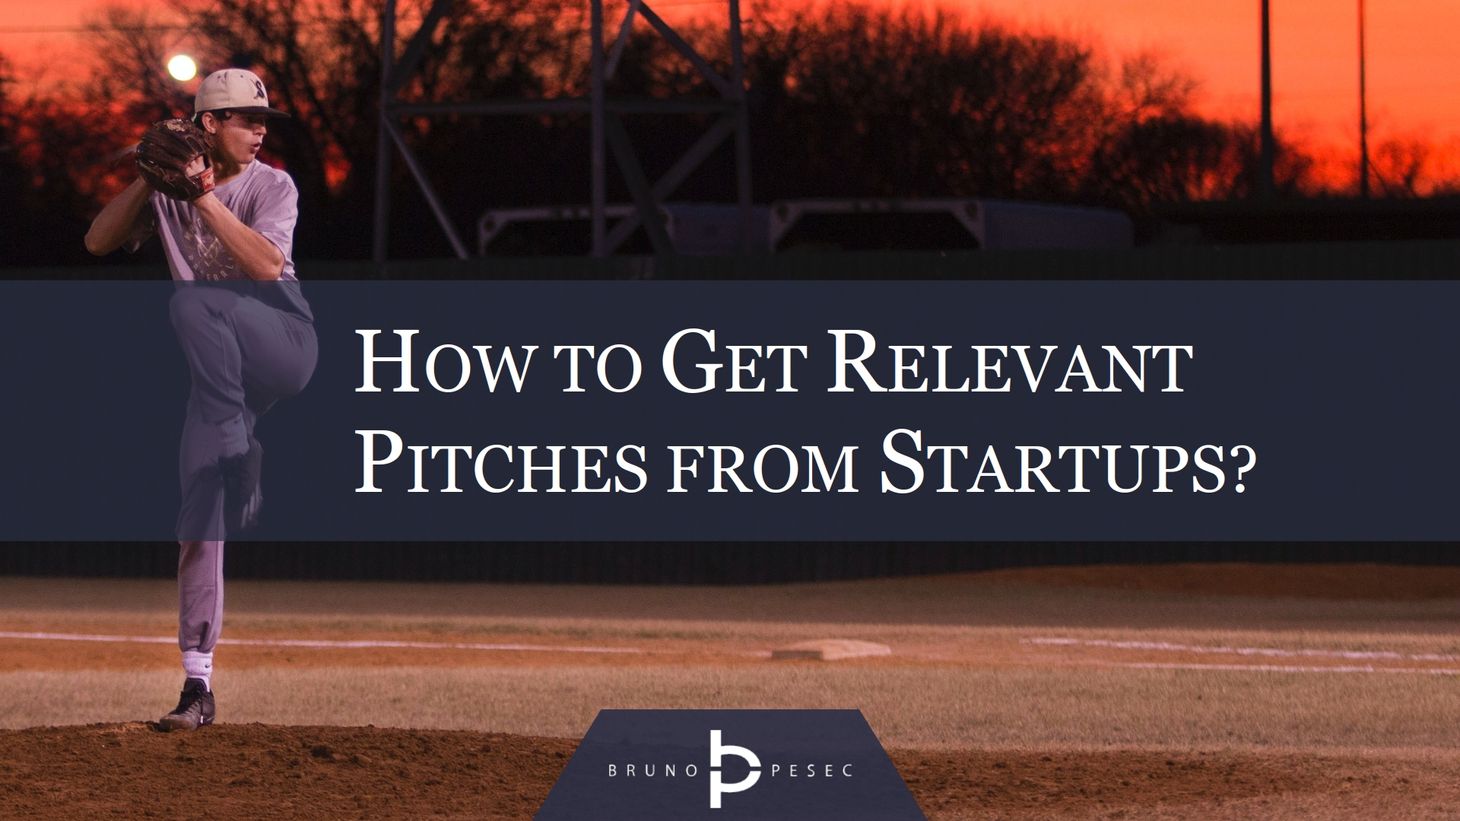 How to get relevant pitches from startups?